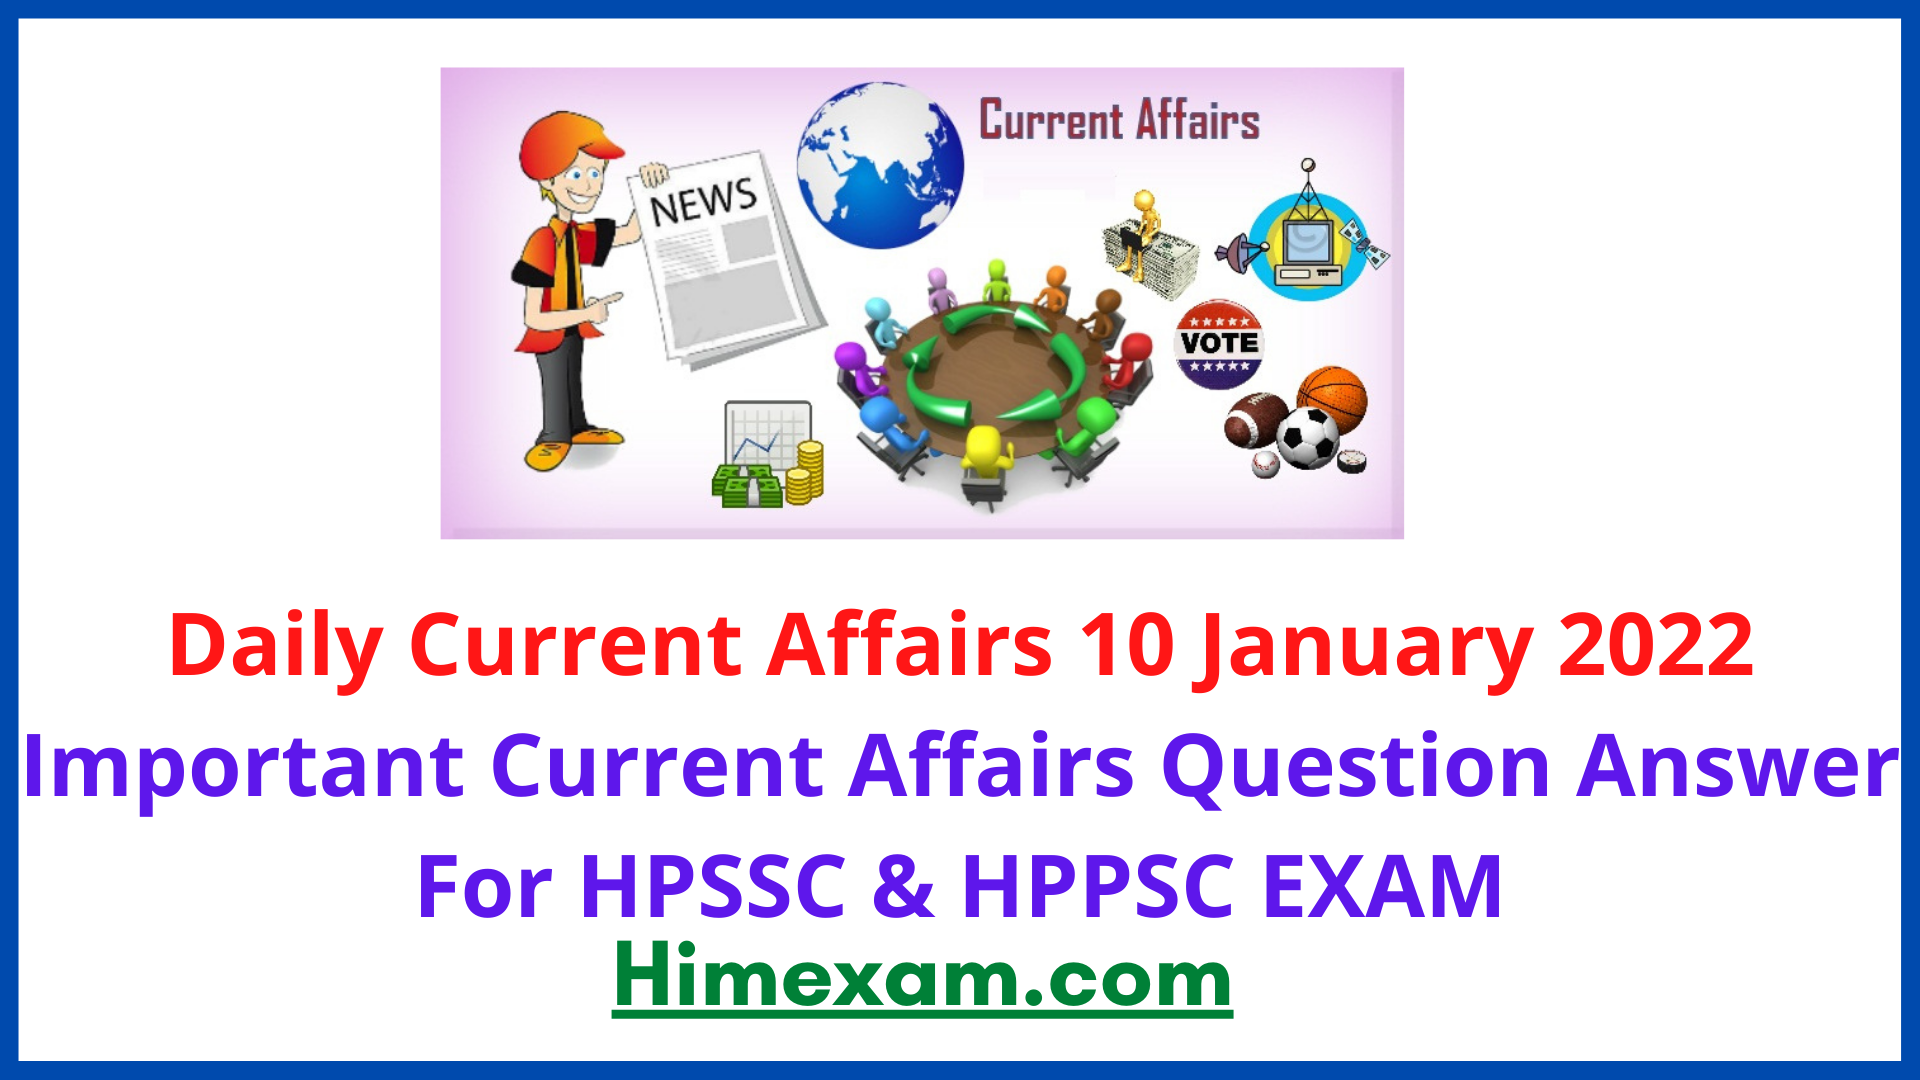 Daily Current Affairs 10 January 2022